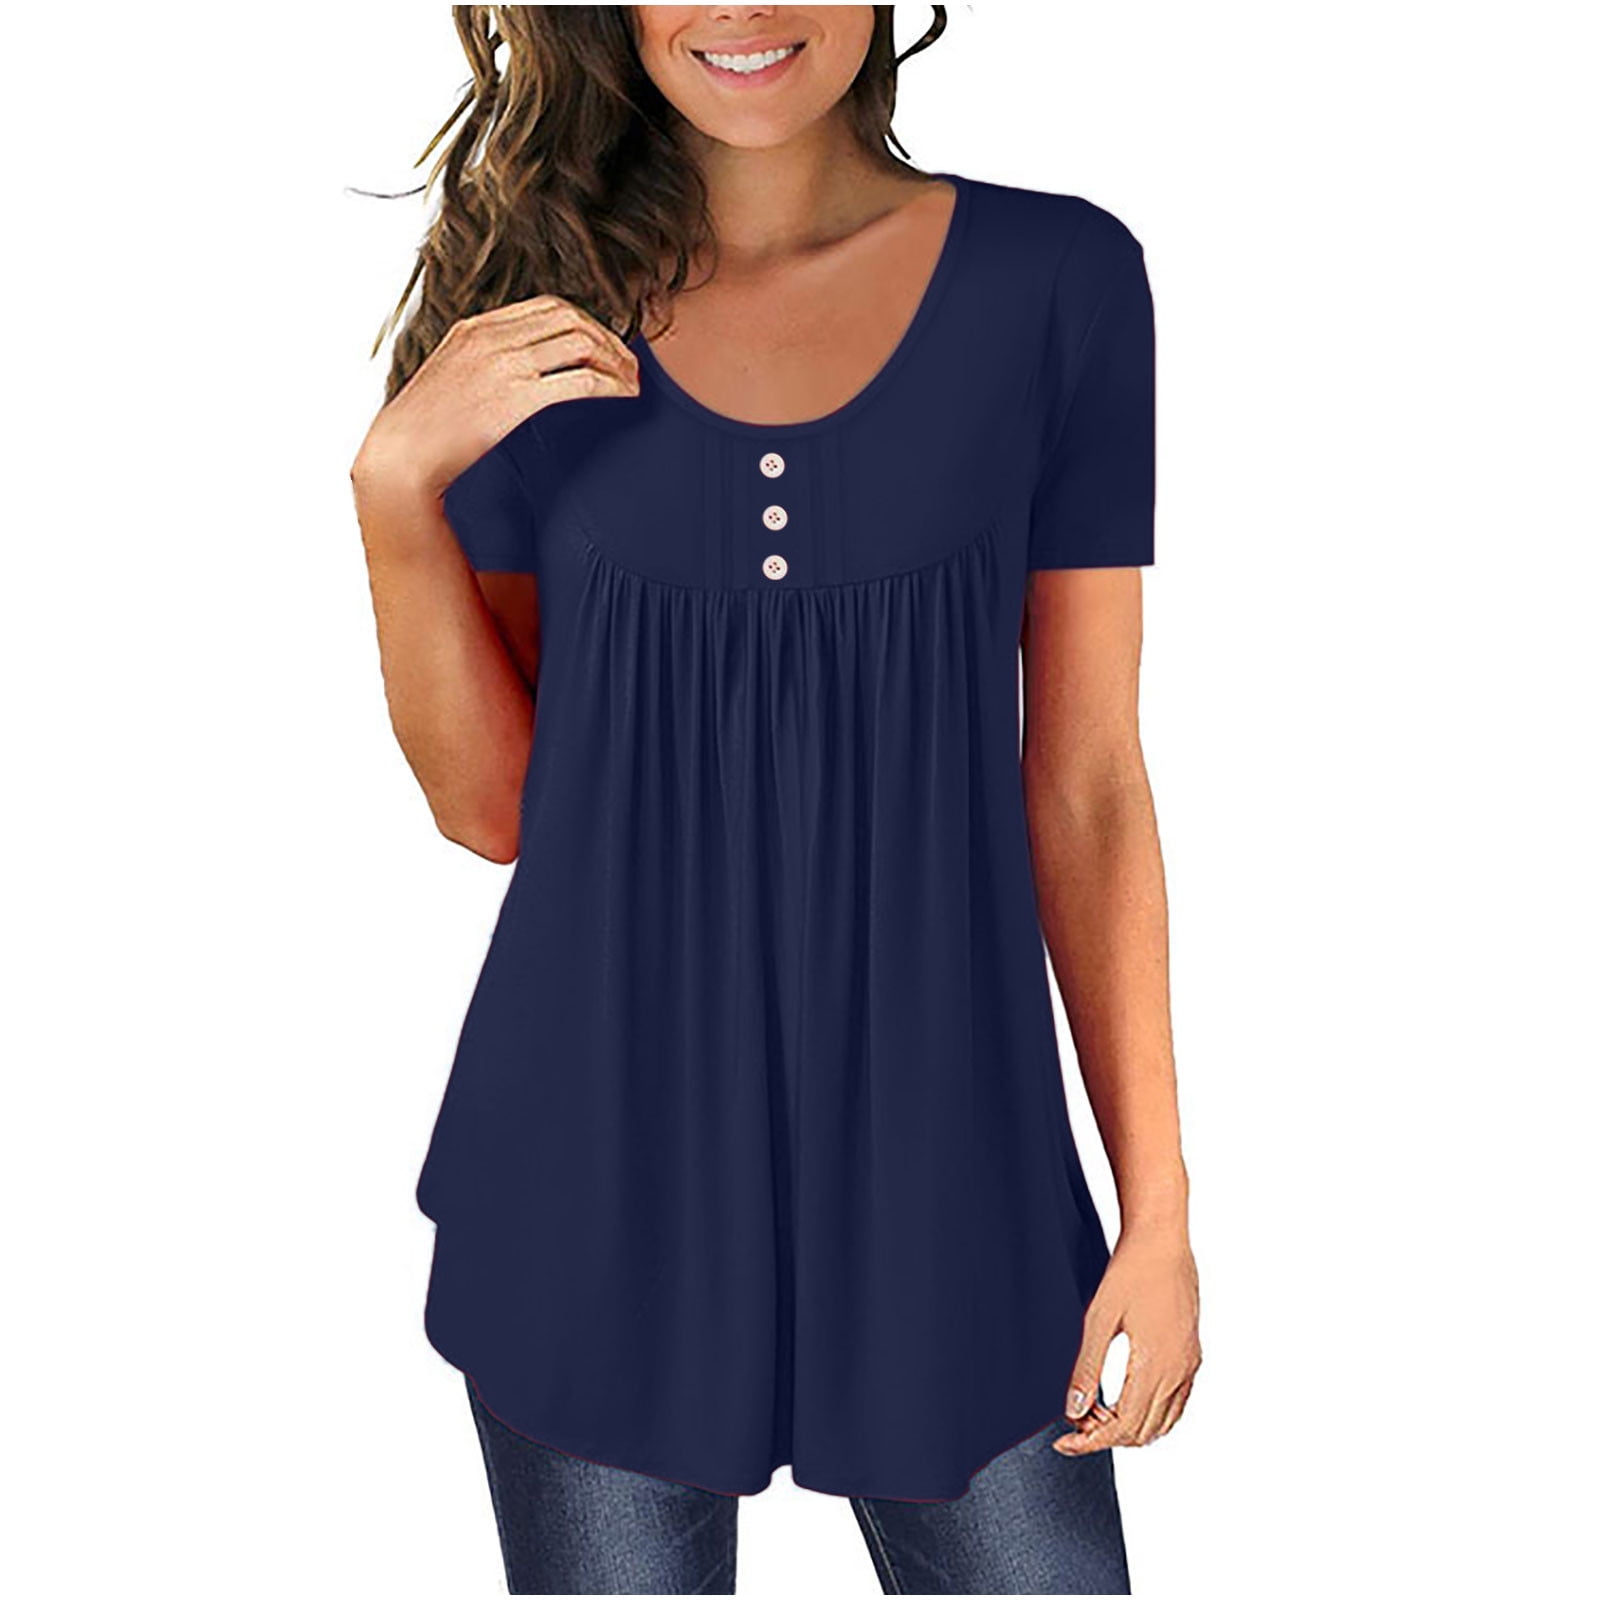 Women's Round Neck Daily Wear Shirts Hide Belly Fat Cute Summer Solid Color  Tunic Tops Buttons Regular Sleeve Loose Fit Short Sleeve Blouses Blusas 